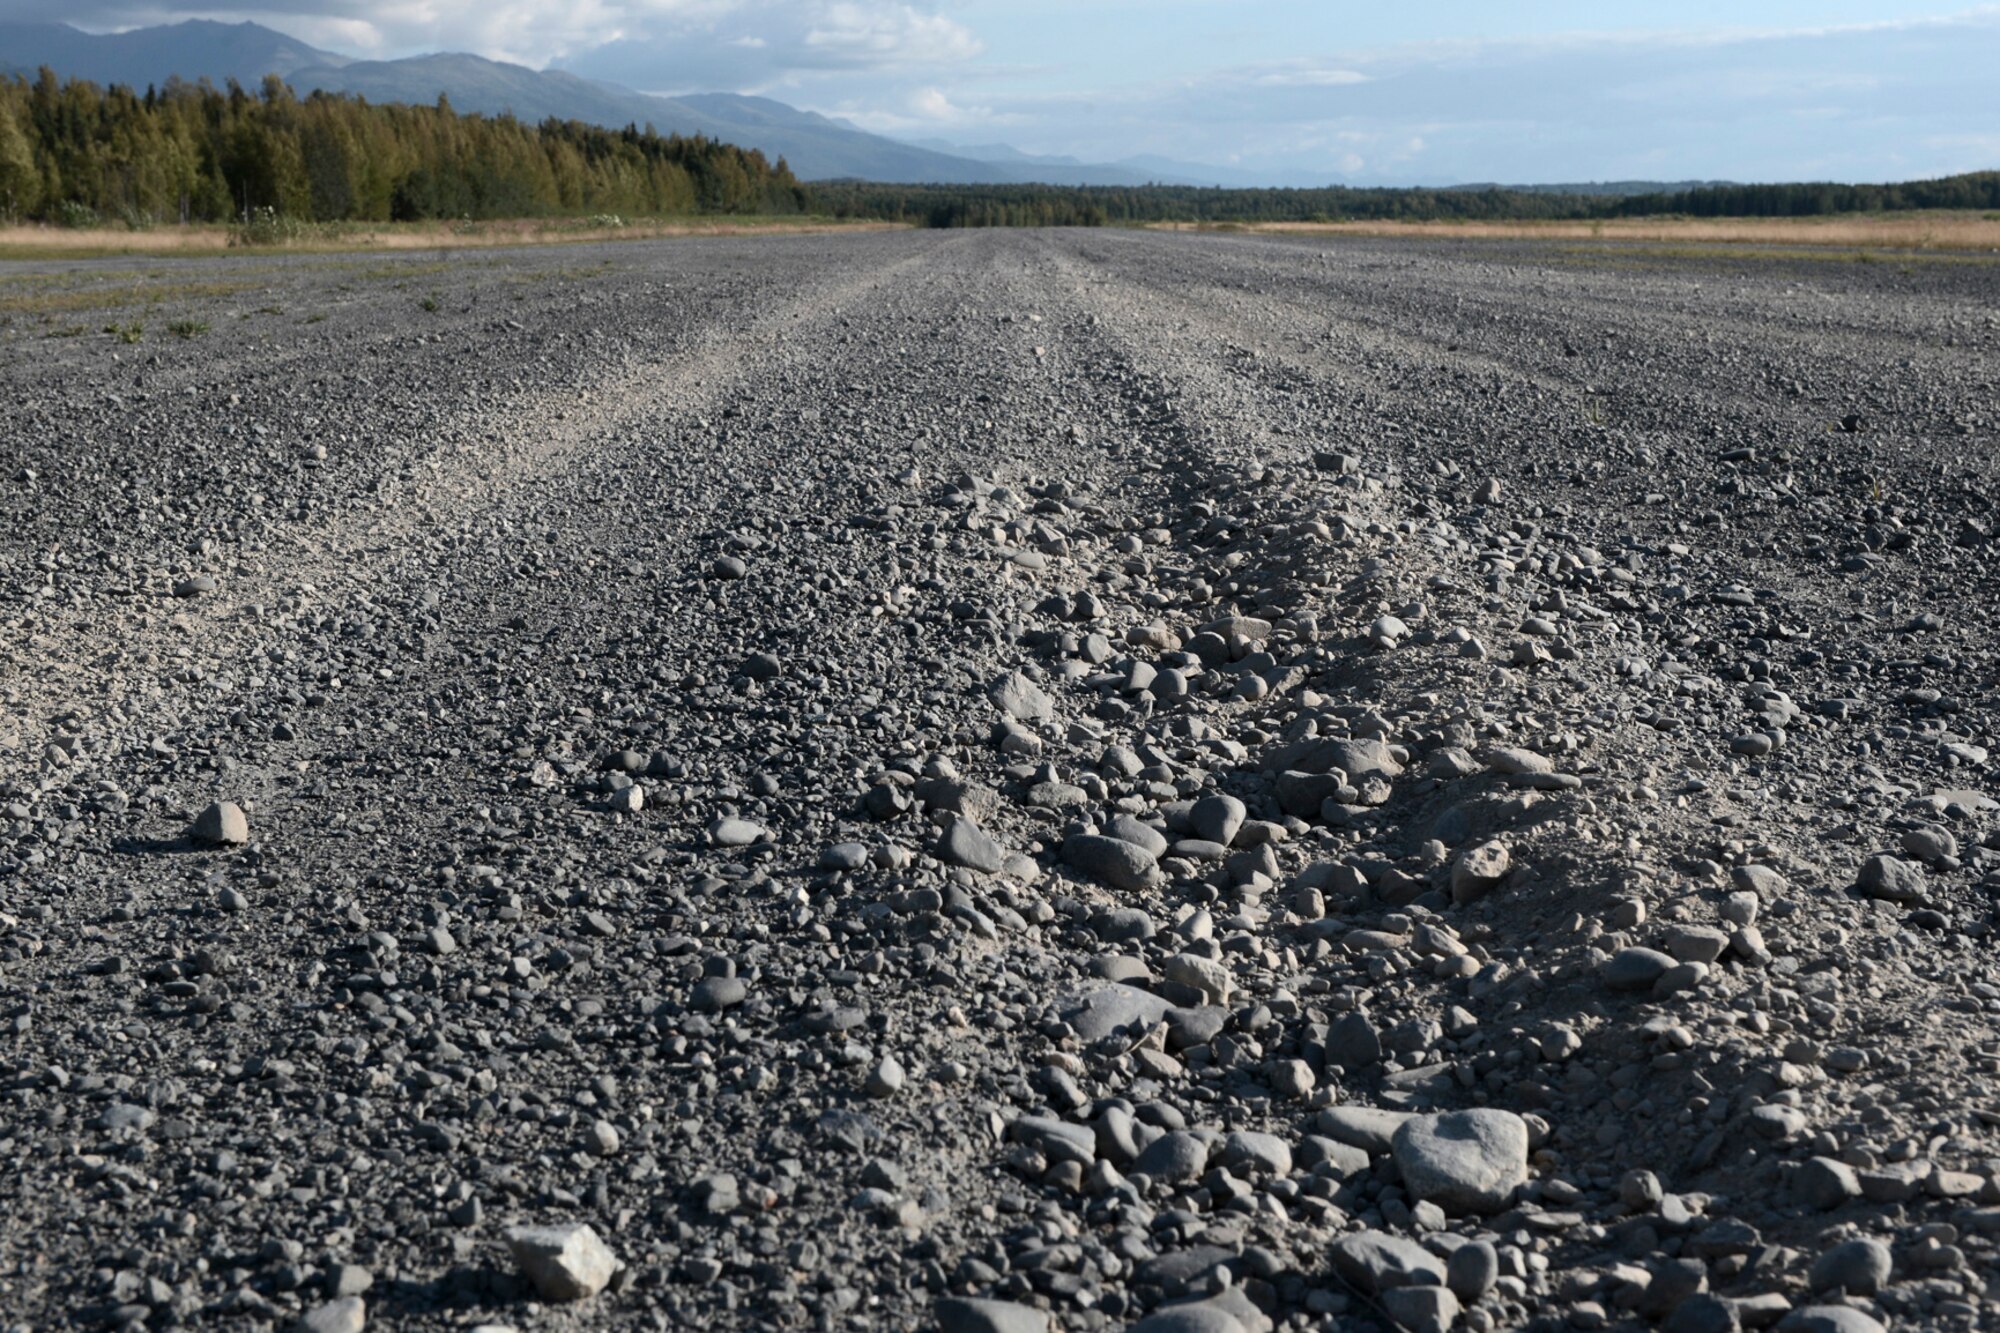 Tire marks left by a C-130 Hercules landing are seen on an austere runway used for training during RED FLAG-Alaska at Joint Base Elmendorf-Richardson, Alaska, Aug. 14, 2015. The training allowed C-130 aircrew to practice austere landings and take offs, combat offloads and supply drops, but also allowed friendly competition between participating Air Forces: U.S. Air Force, Japan Air Self-Defense Force, Royal Air Force, Royal Australian Air Force, Royal New Zealand Air Force and Royal Thai Air Force. Seasoned C-130 aircrew from each country judged the training exercises from the ground, allotting points based off predetermined timing and accuracy requirements. (U.S. Air Force photo by Staff Sgt. Cody H. Ramirez/Released)